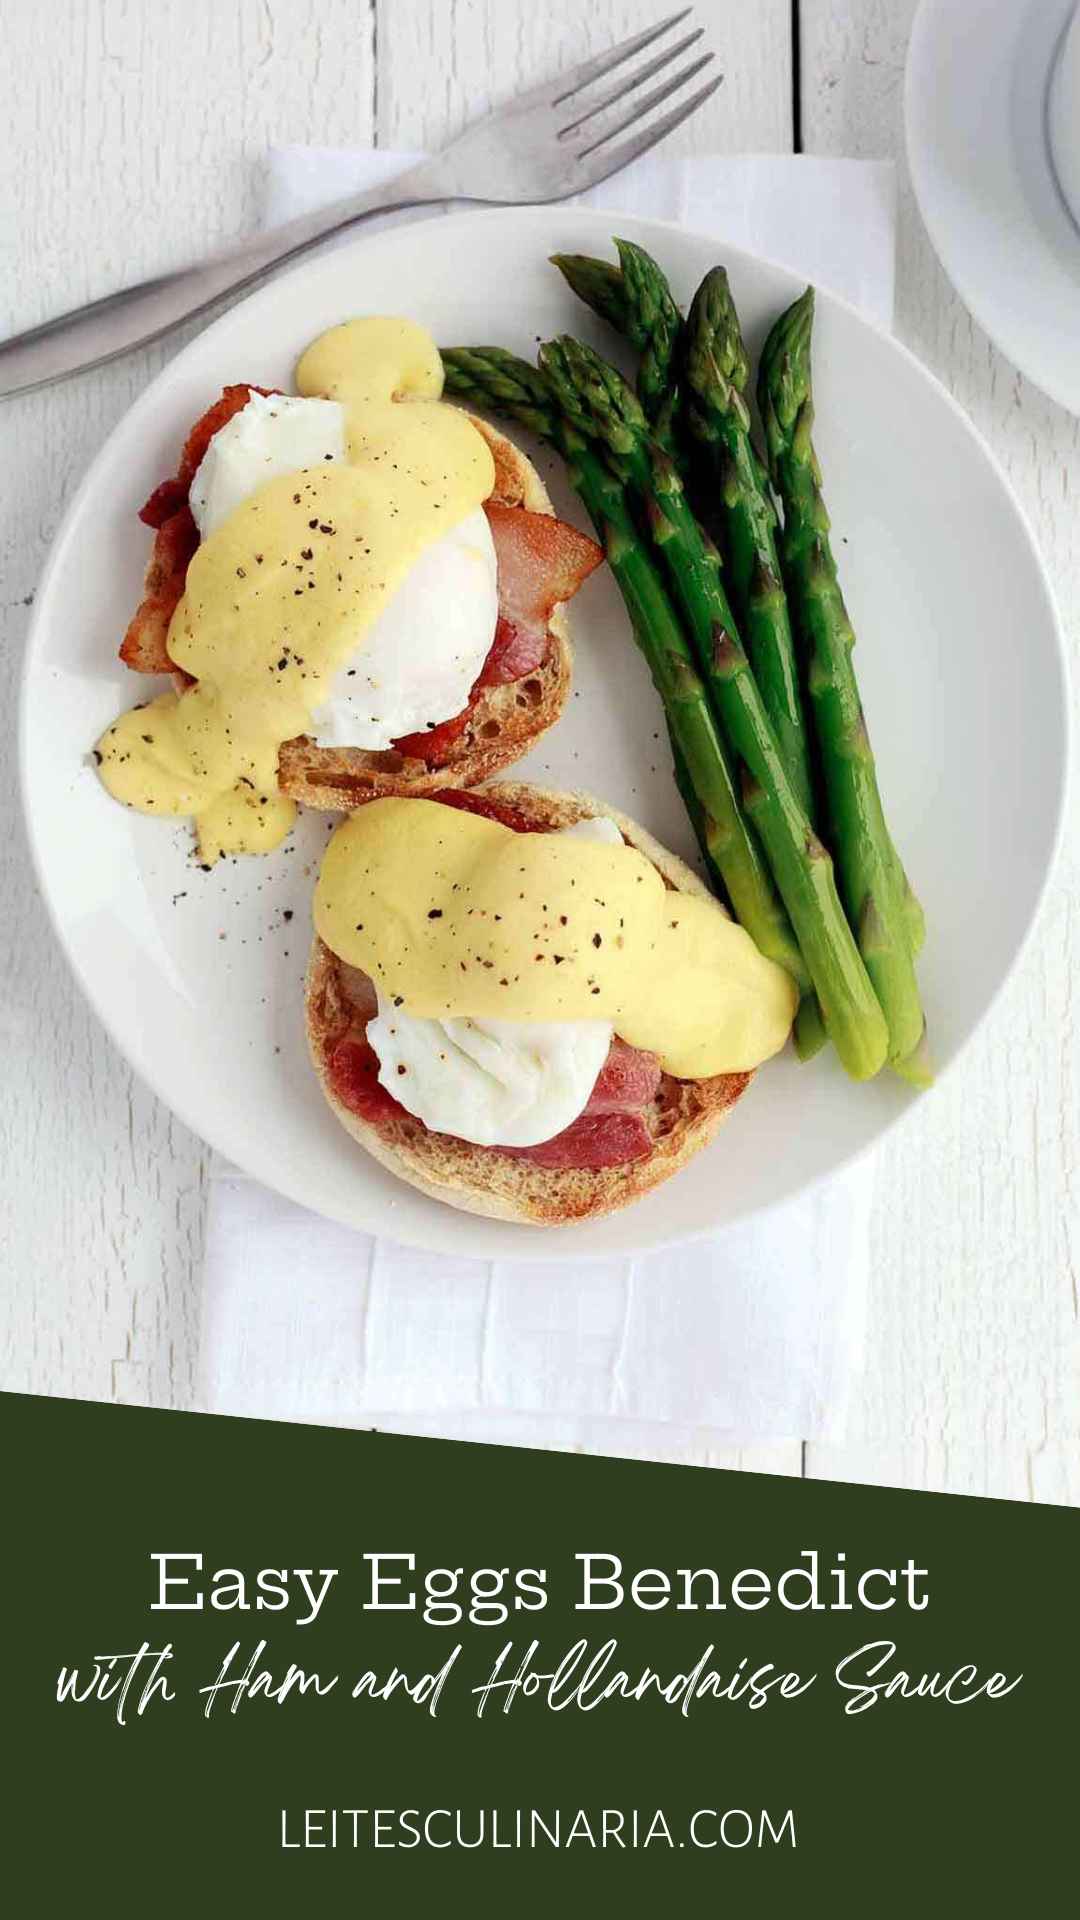 Two eggs Benedict with ham and Hollandaise sauce on a white plate with spears of asparagus.